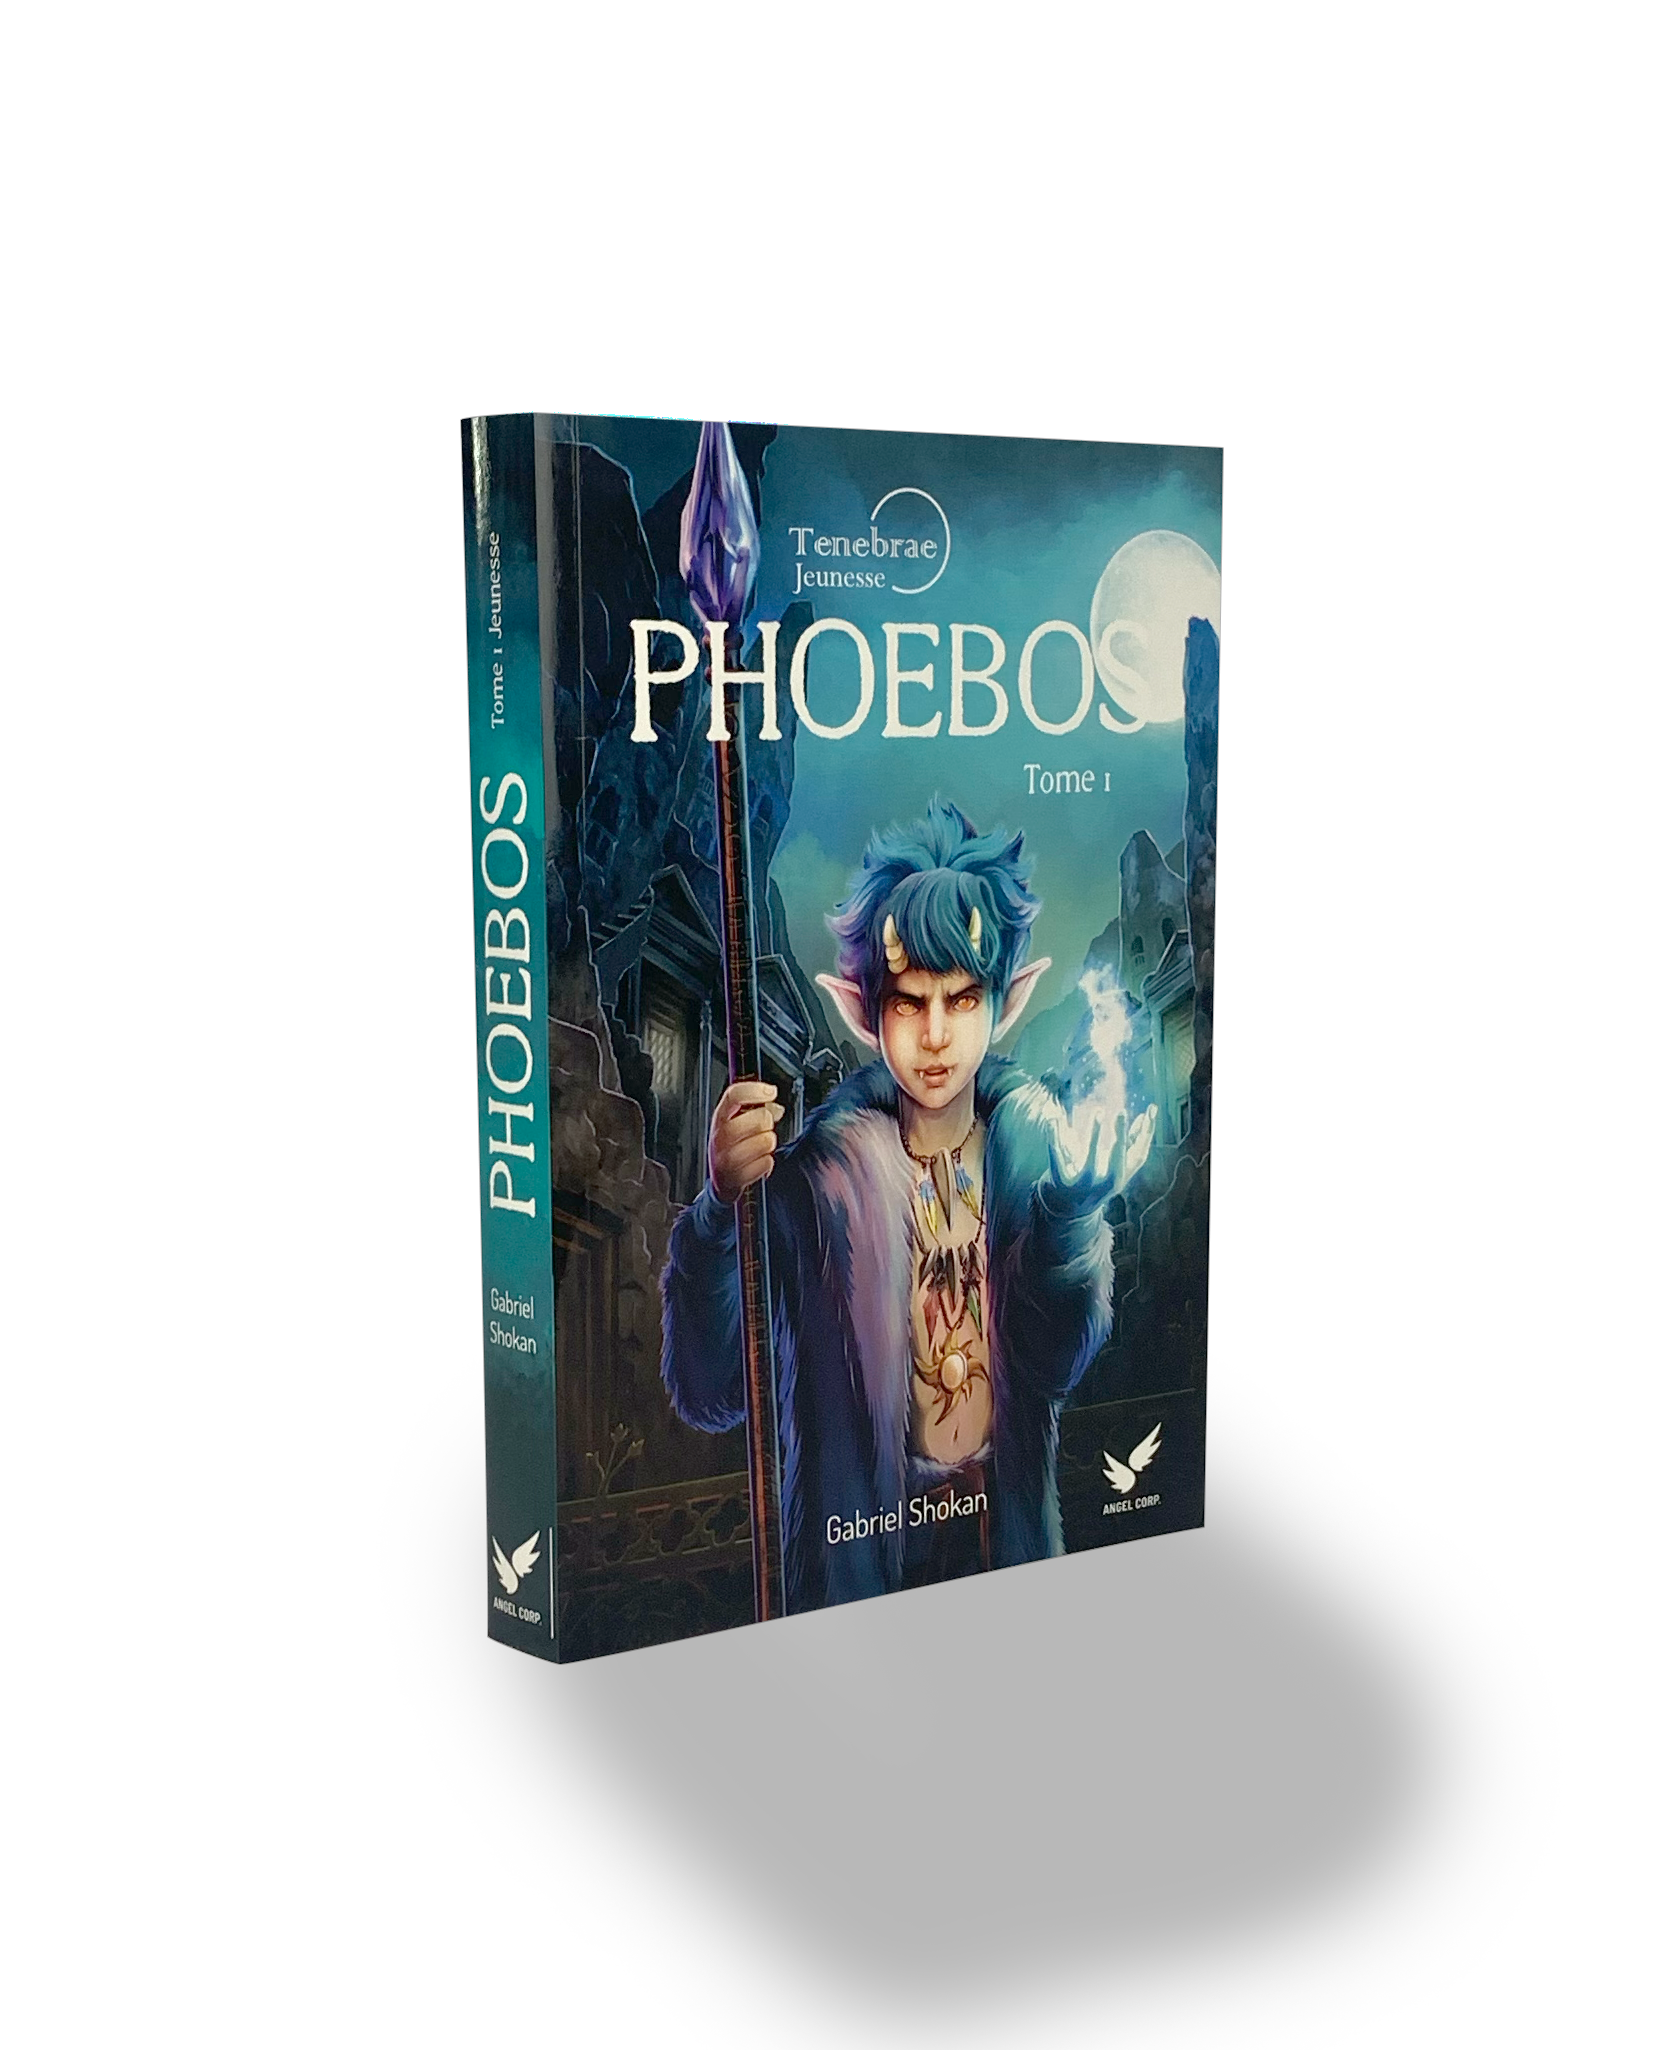 Phoebos - Jeunesse Tome 1